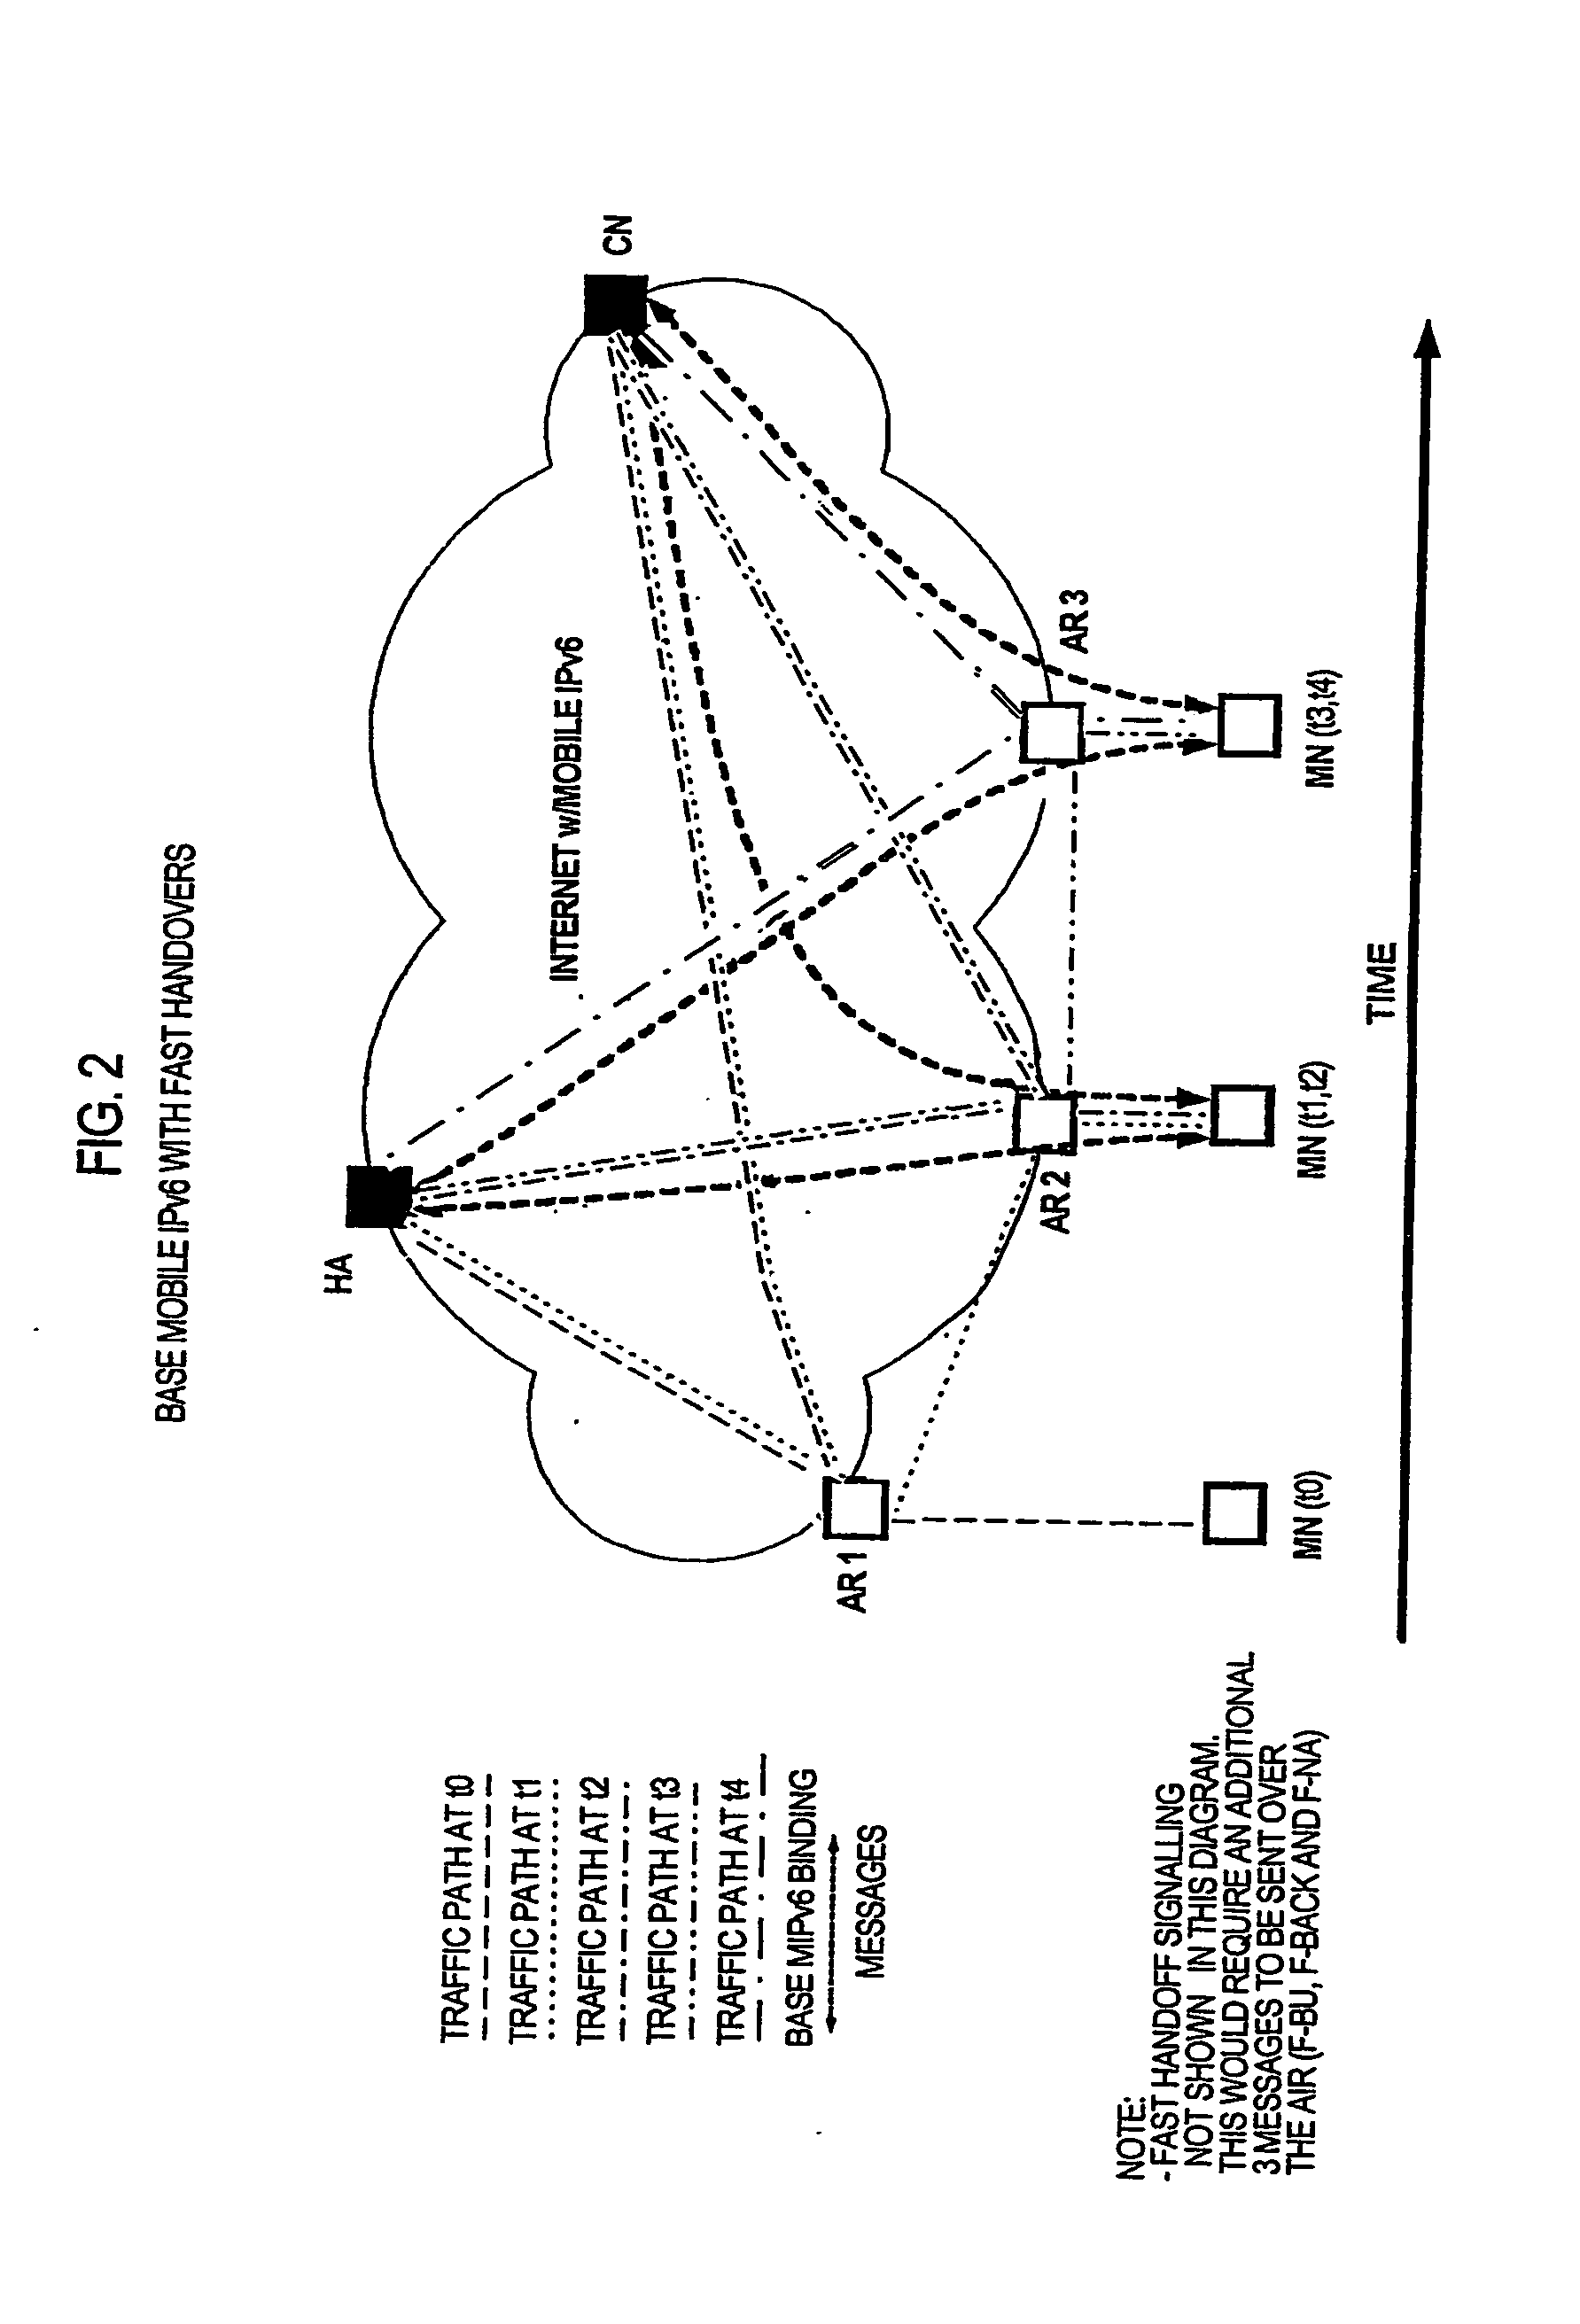 Method and system for managing data flow between mobile nodes, access routers and peer nodes